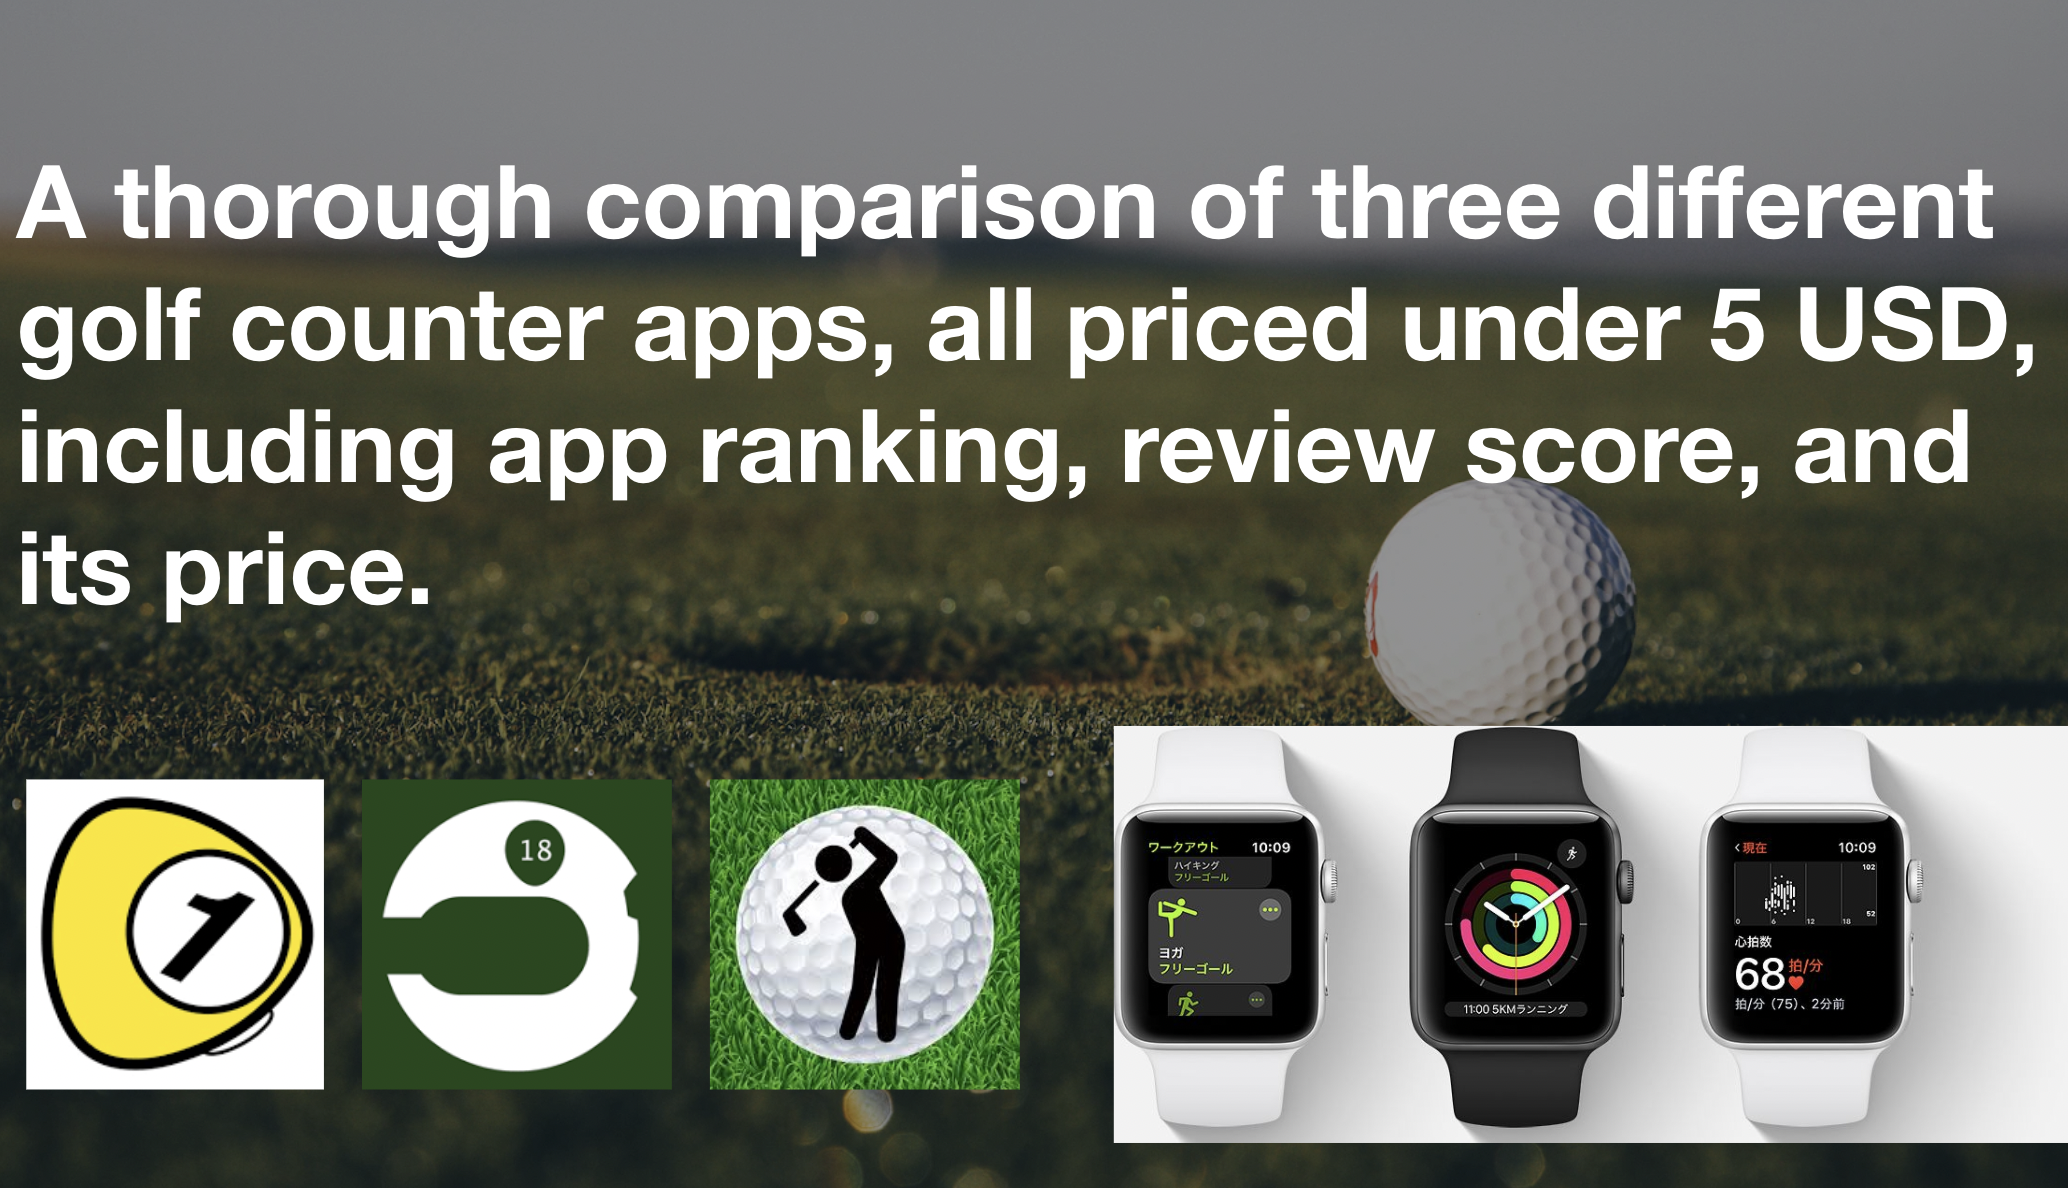 golfScoreCounterDotcom_A thorough comparison of three different golf counter apps, all priced under 10 USD, including app ranking, review score, and its price.